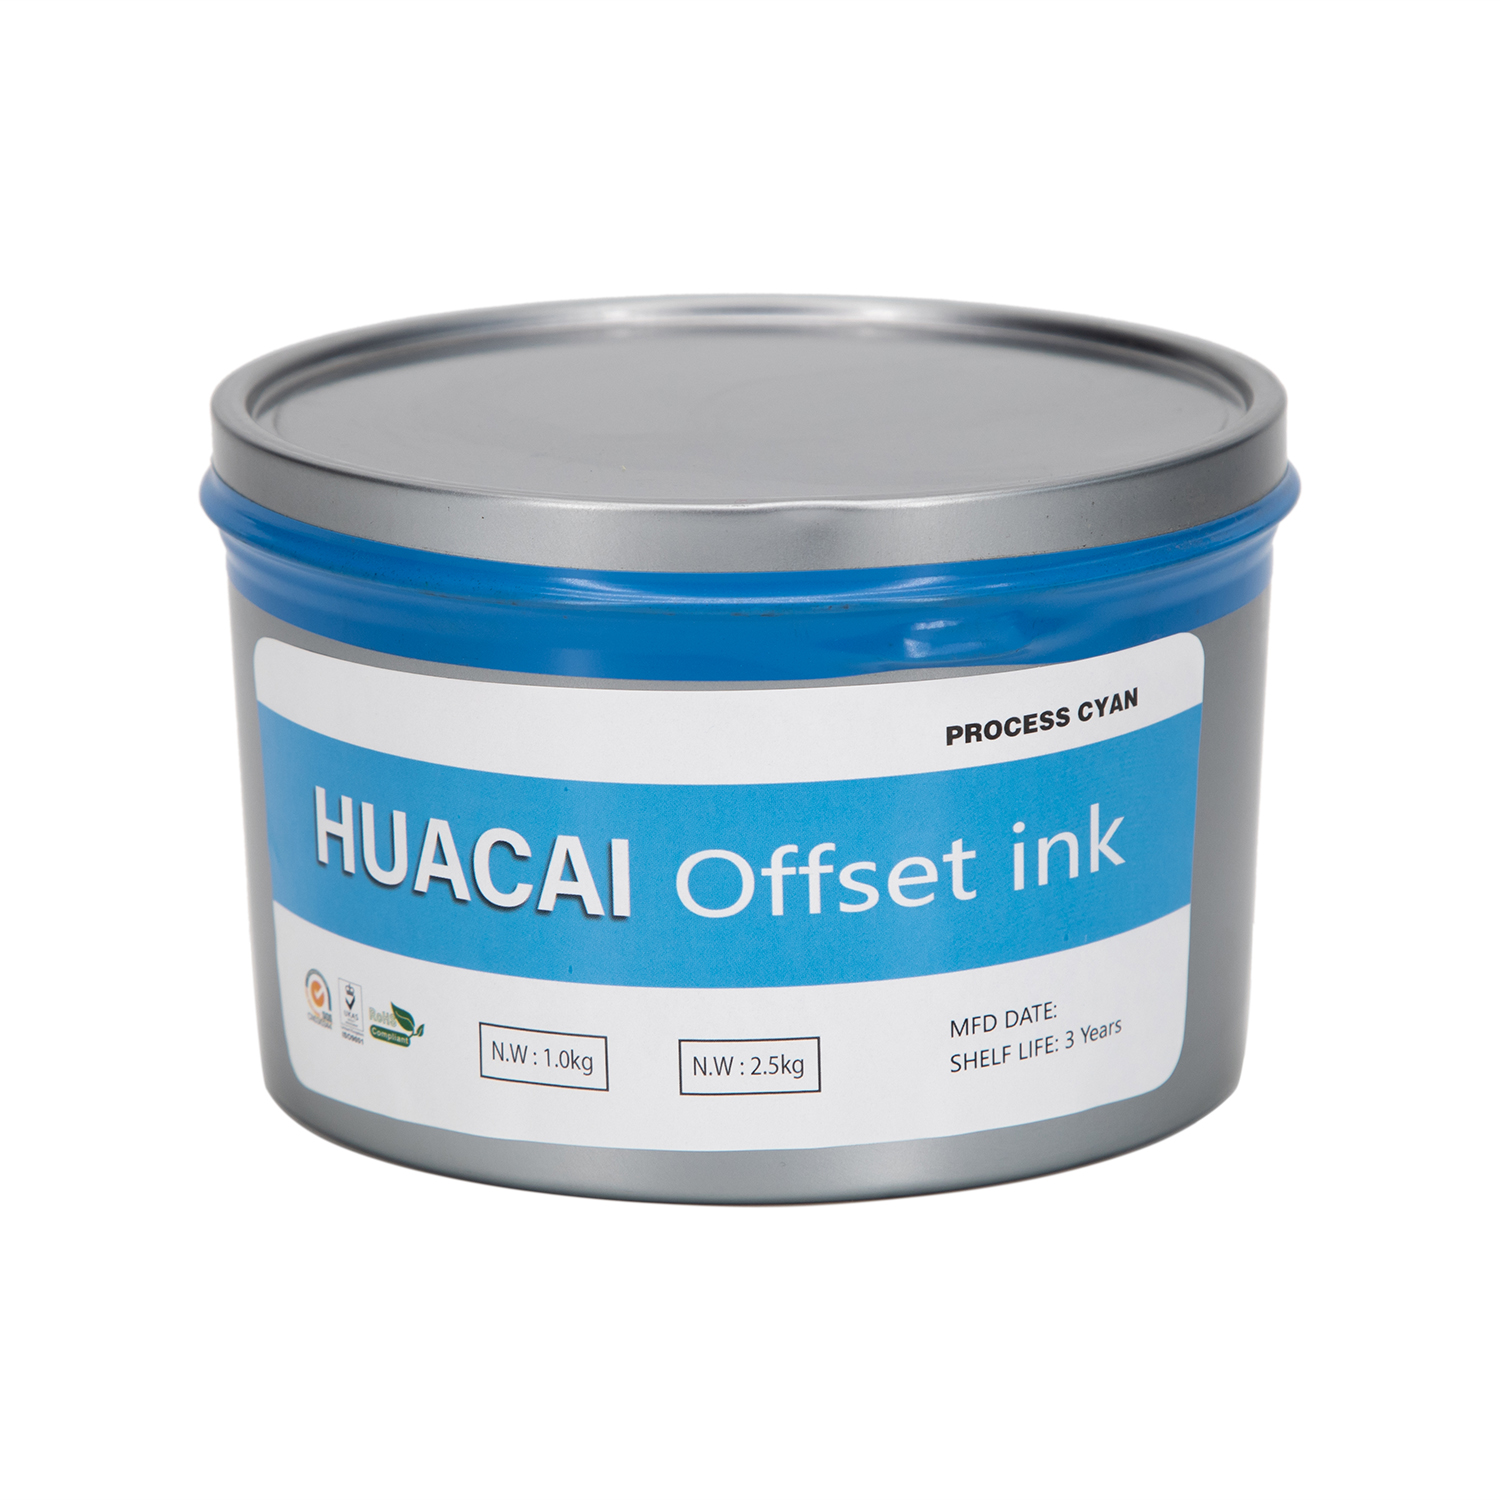 solvent based ink offset printing about offset printing ink